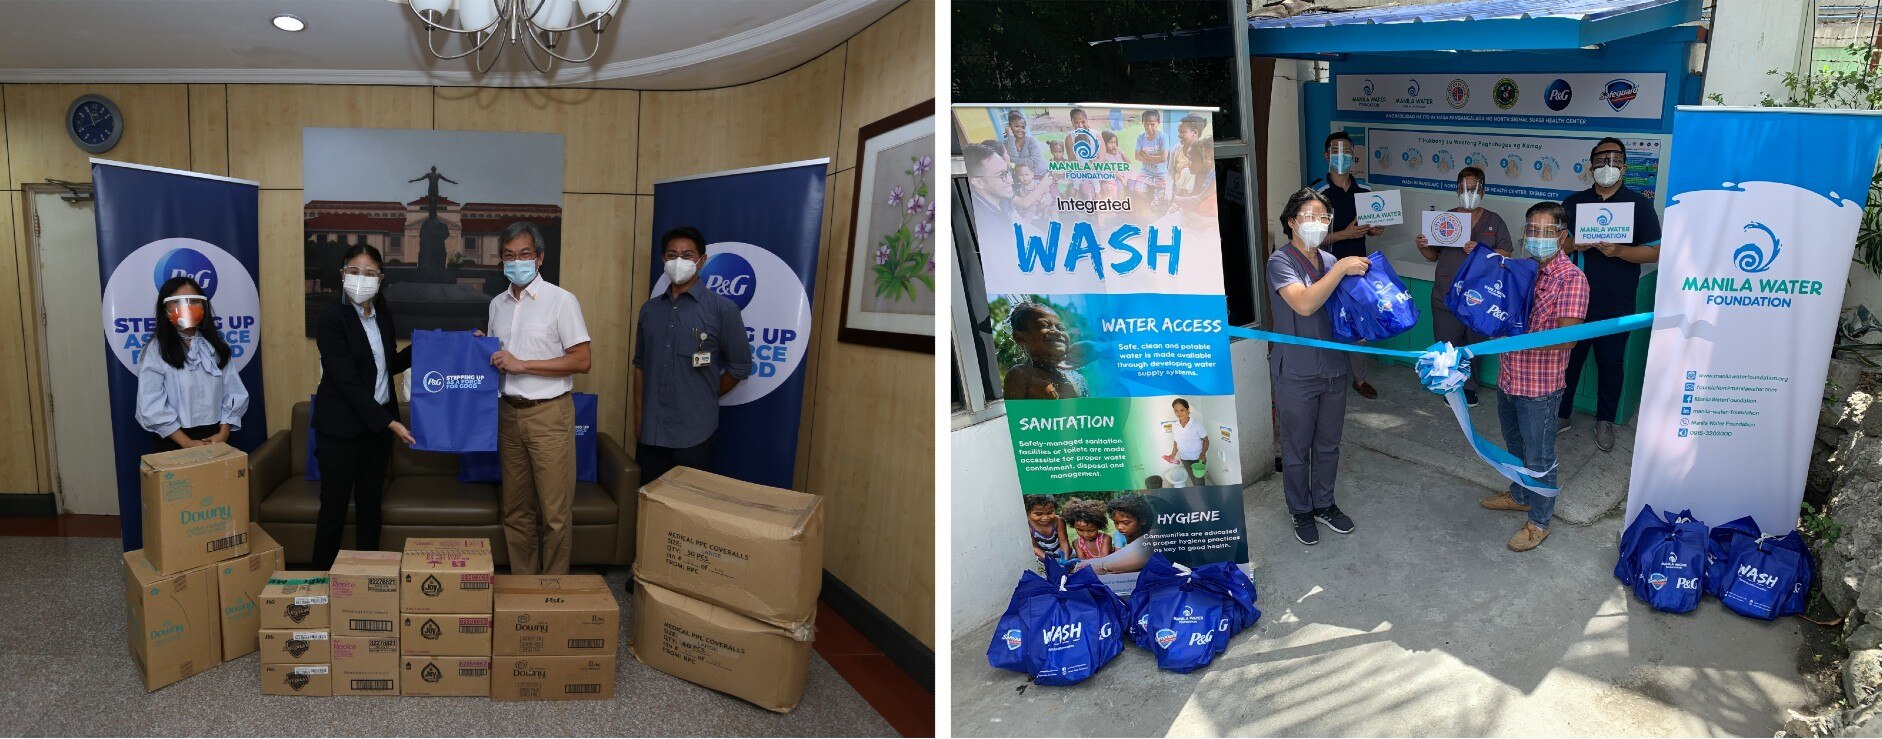 P&G Safeguard's P100 million donation aims to support the community by accelerating its SAFEWash movement. Photo source: P&G Safeguard